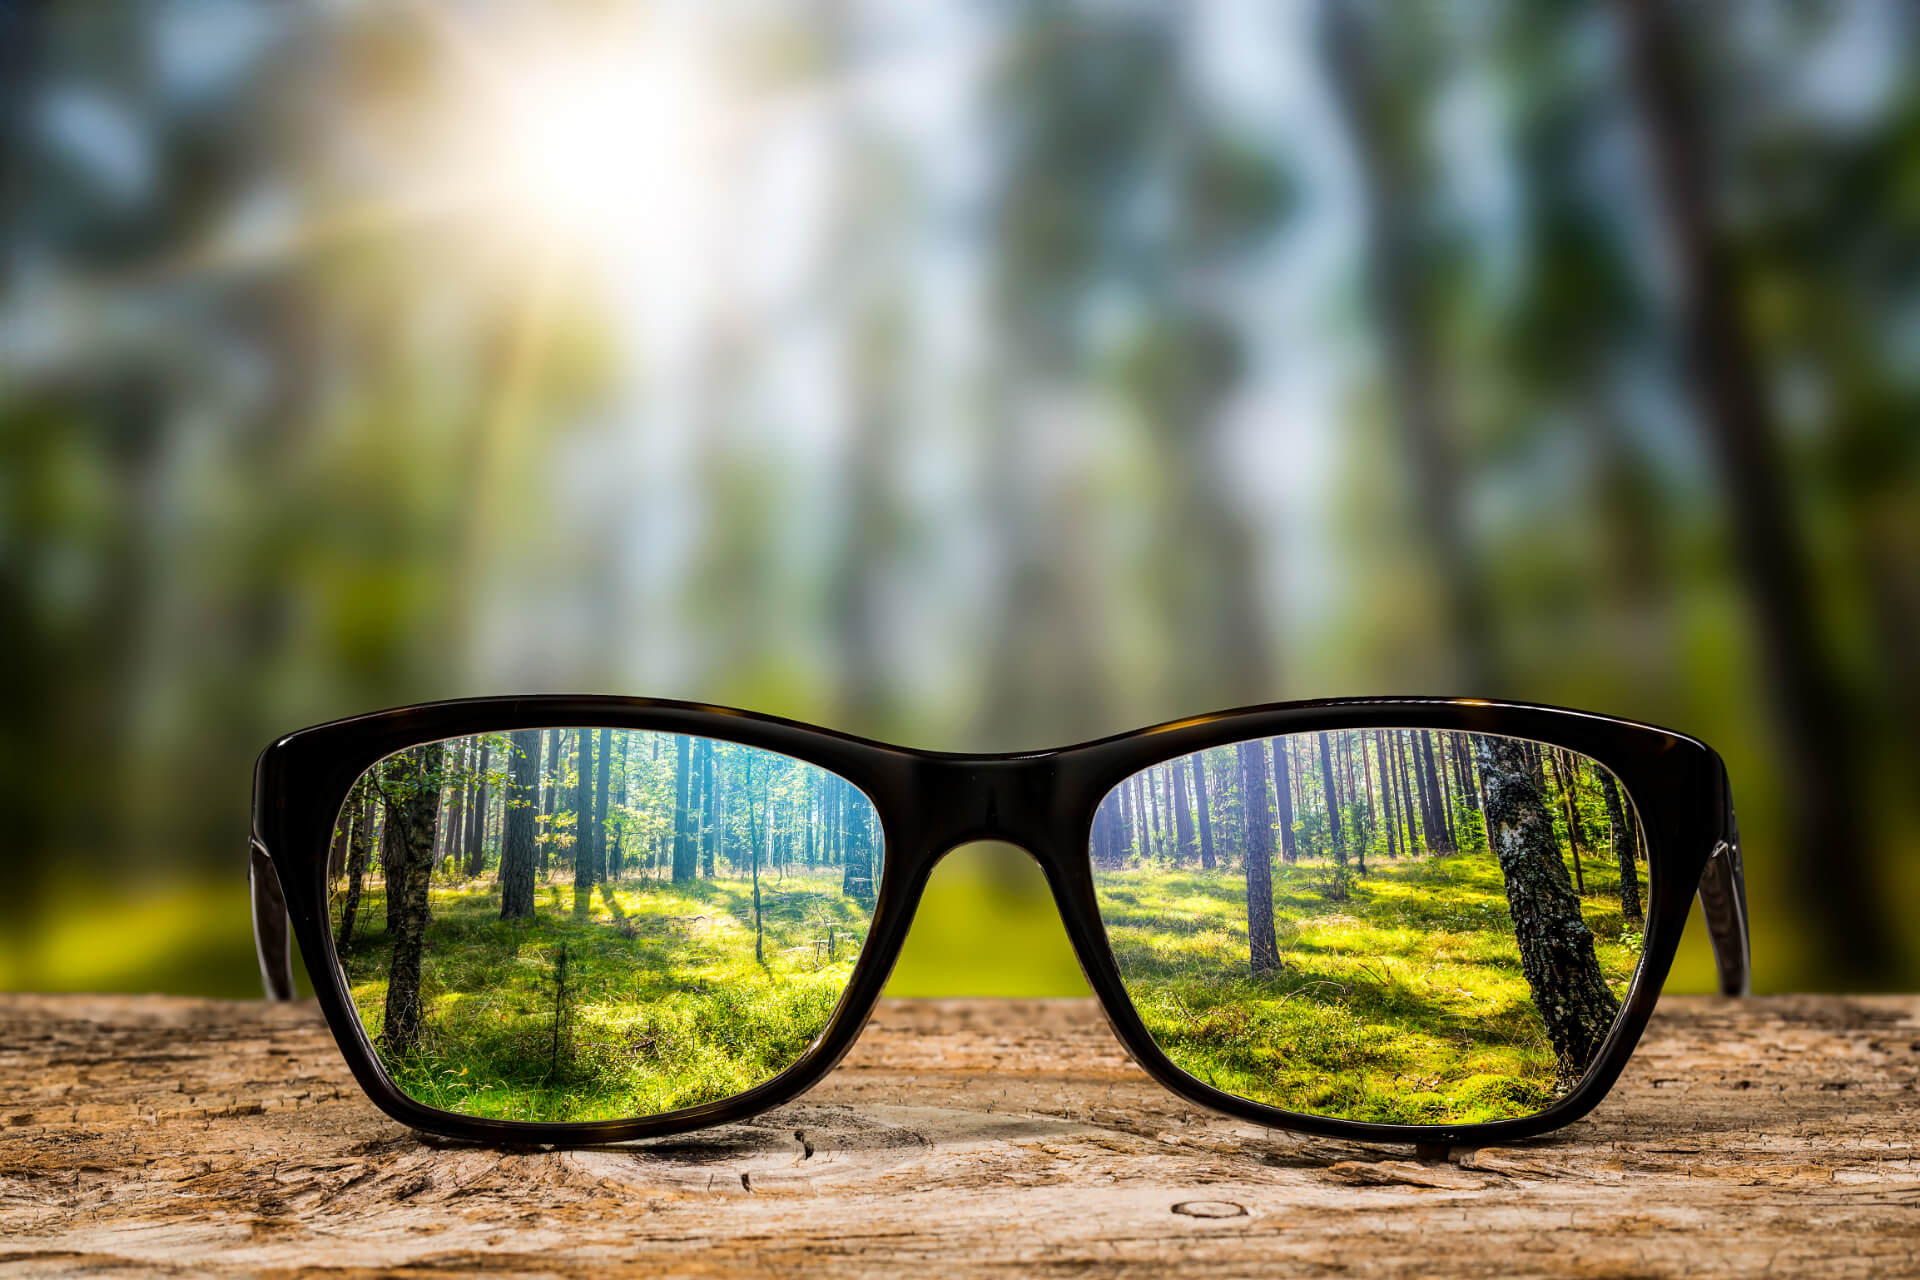 Glasses lens showing a sharp foreground with a blurred background